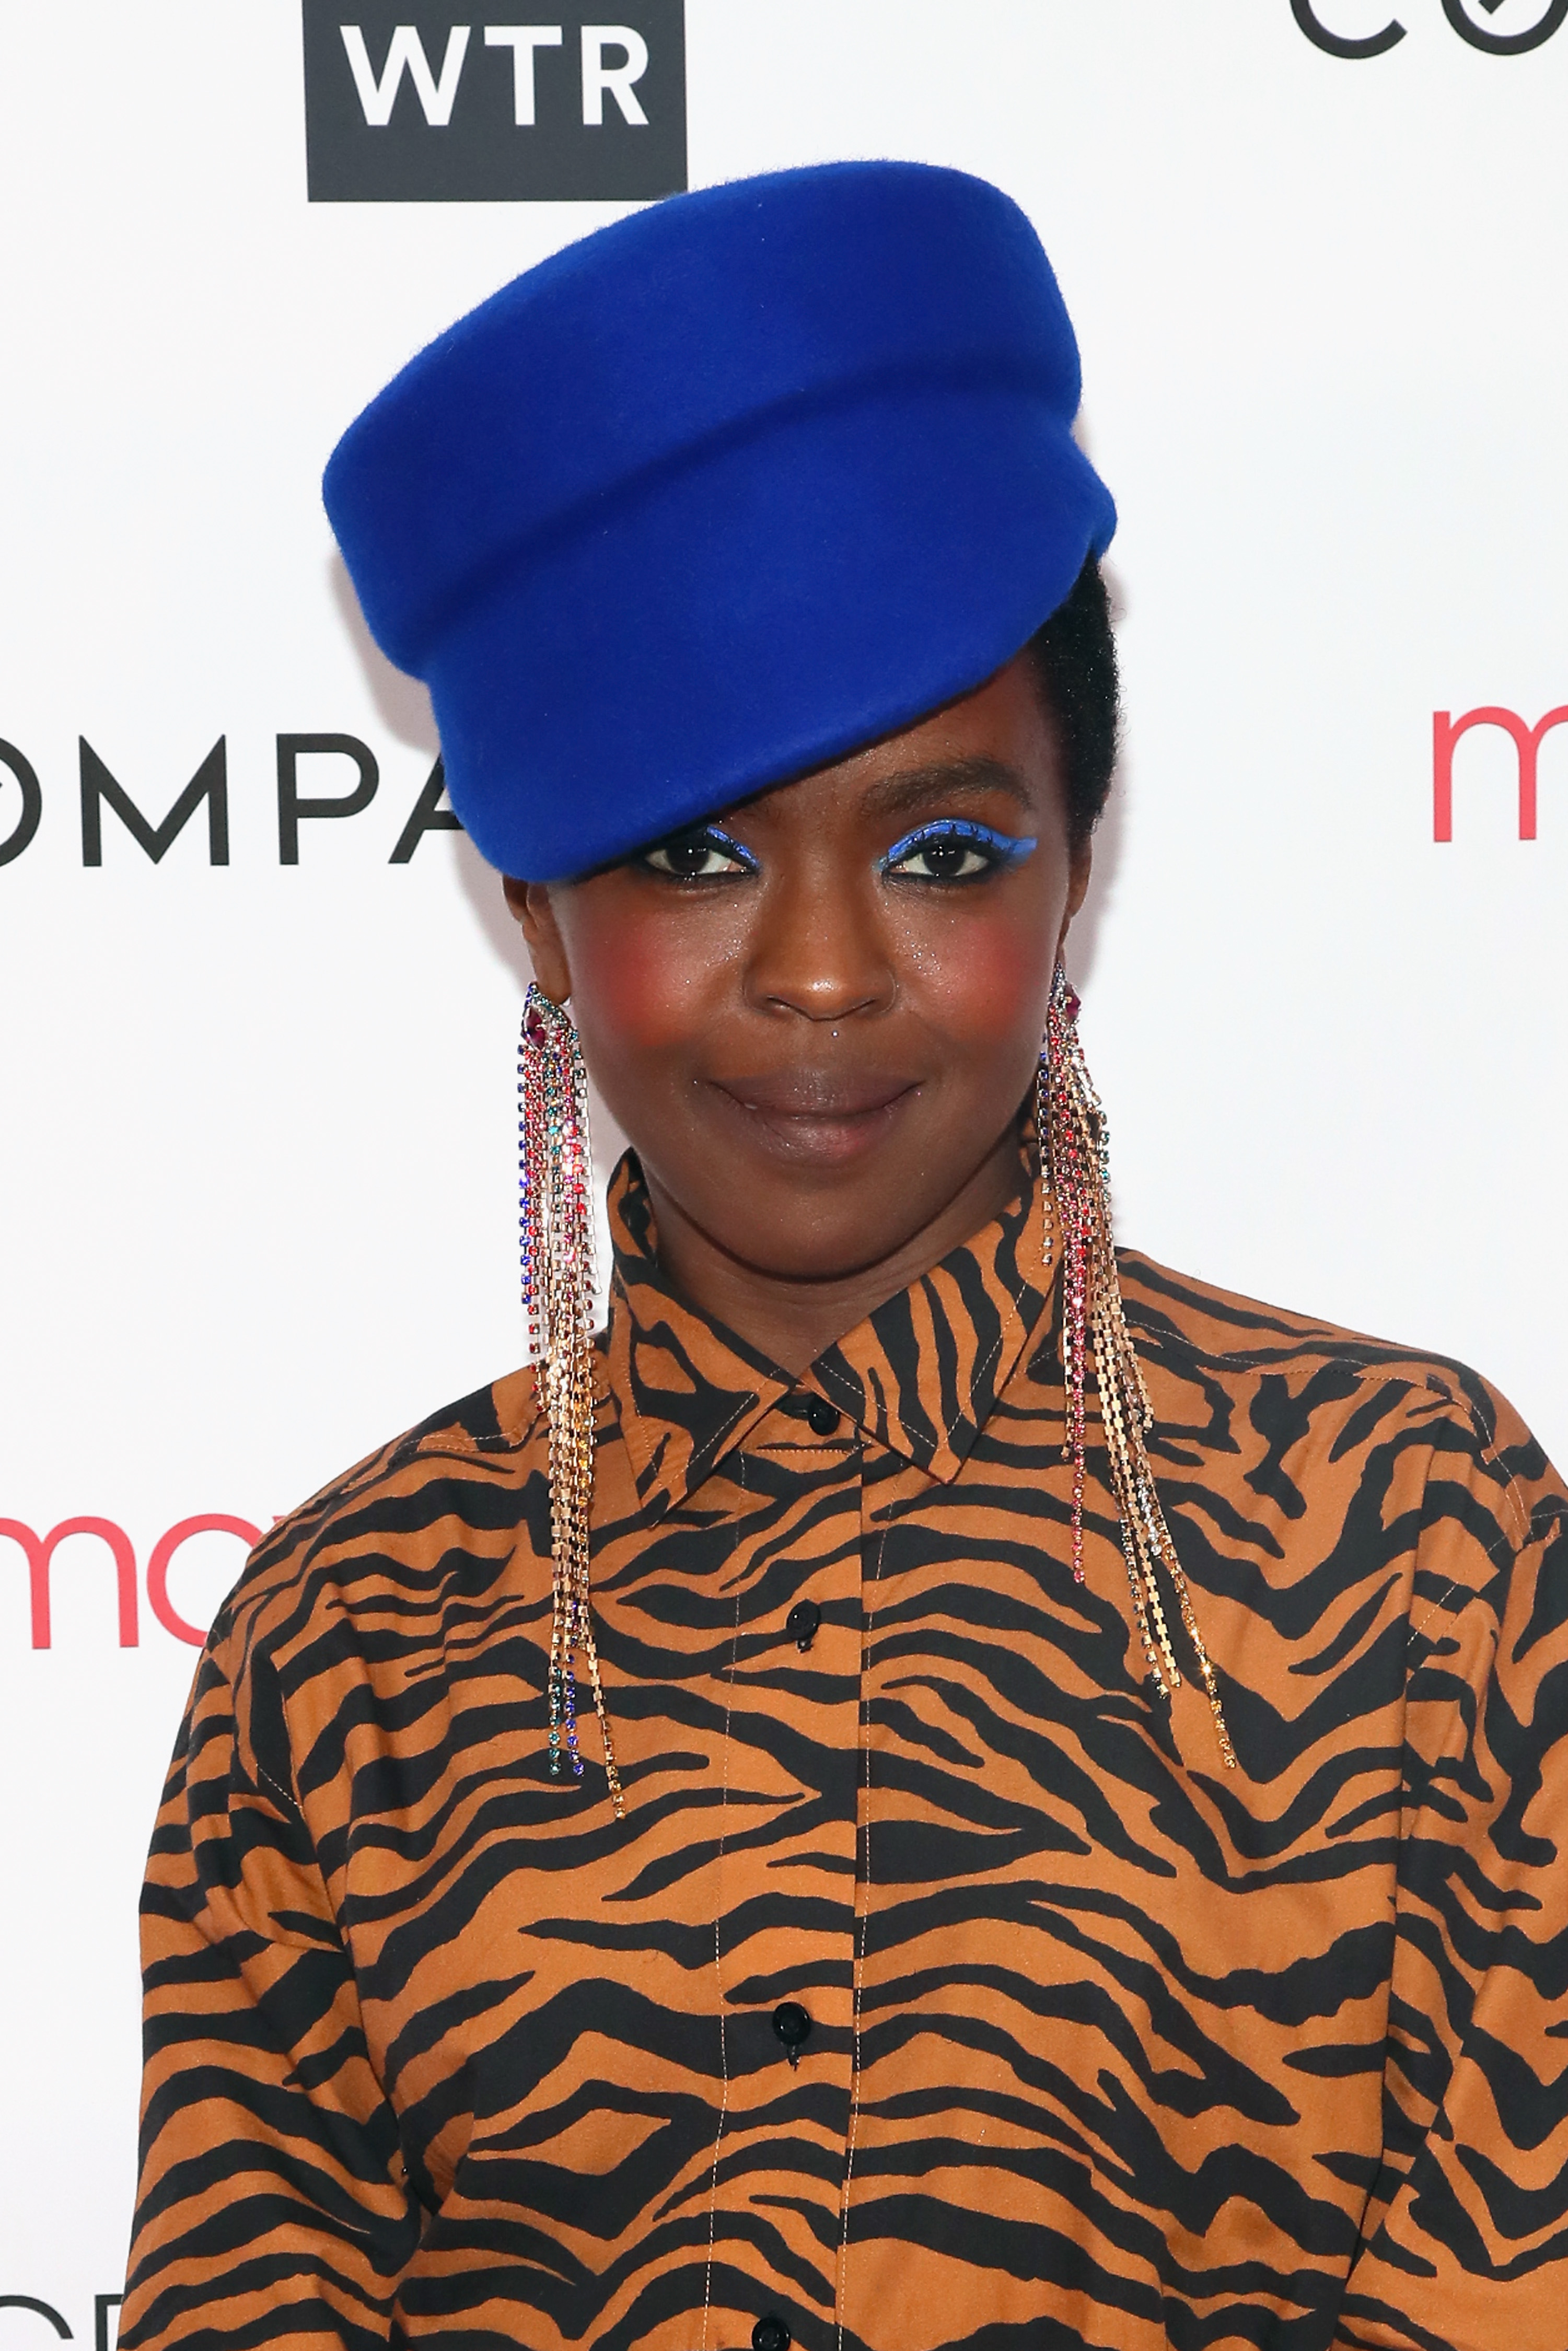 How Many Children Does Lauryn Hill Have?